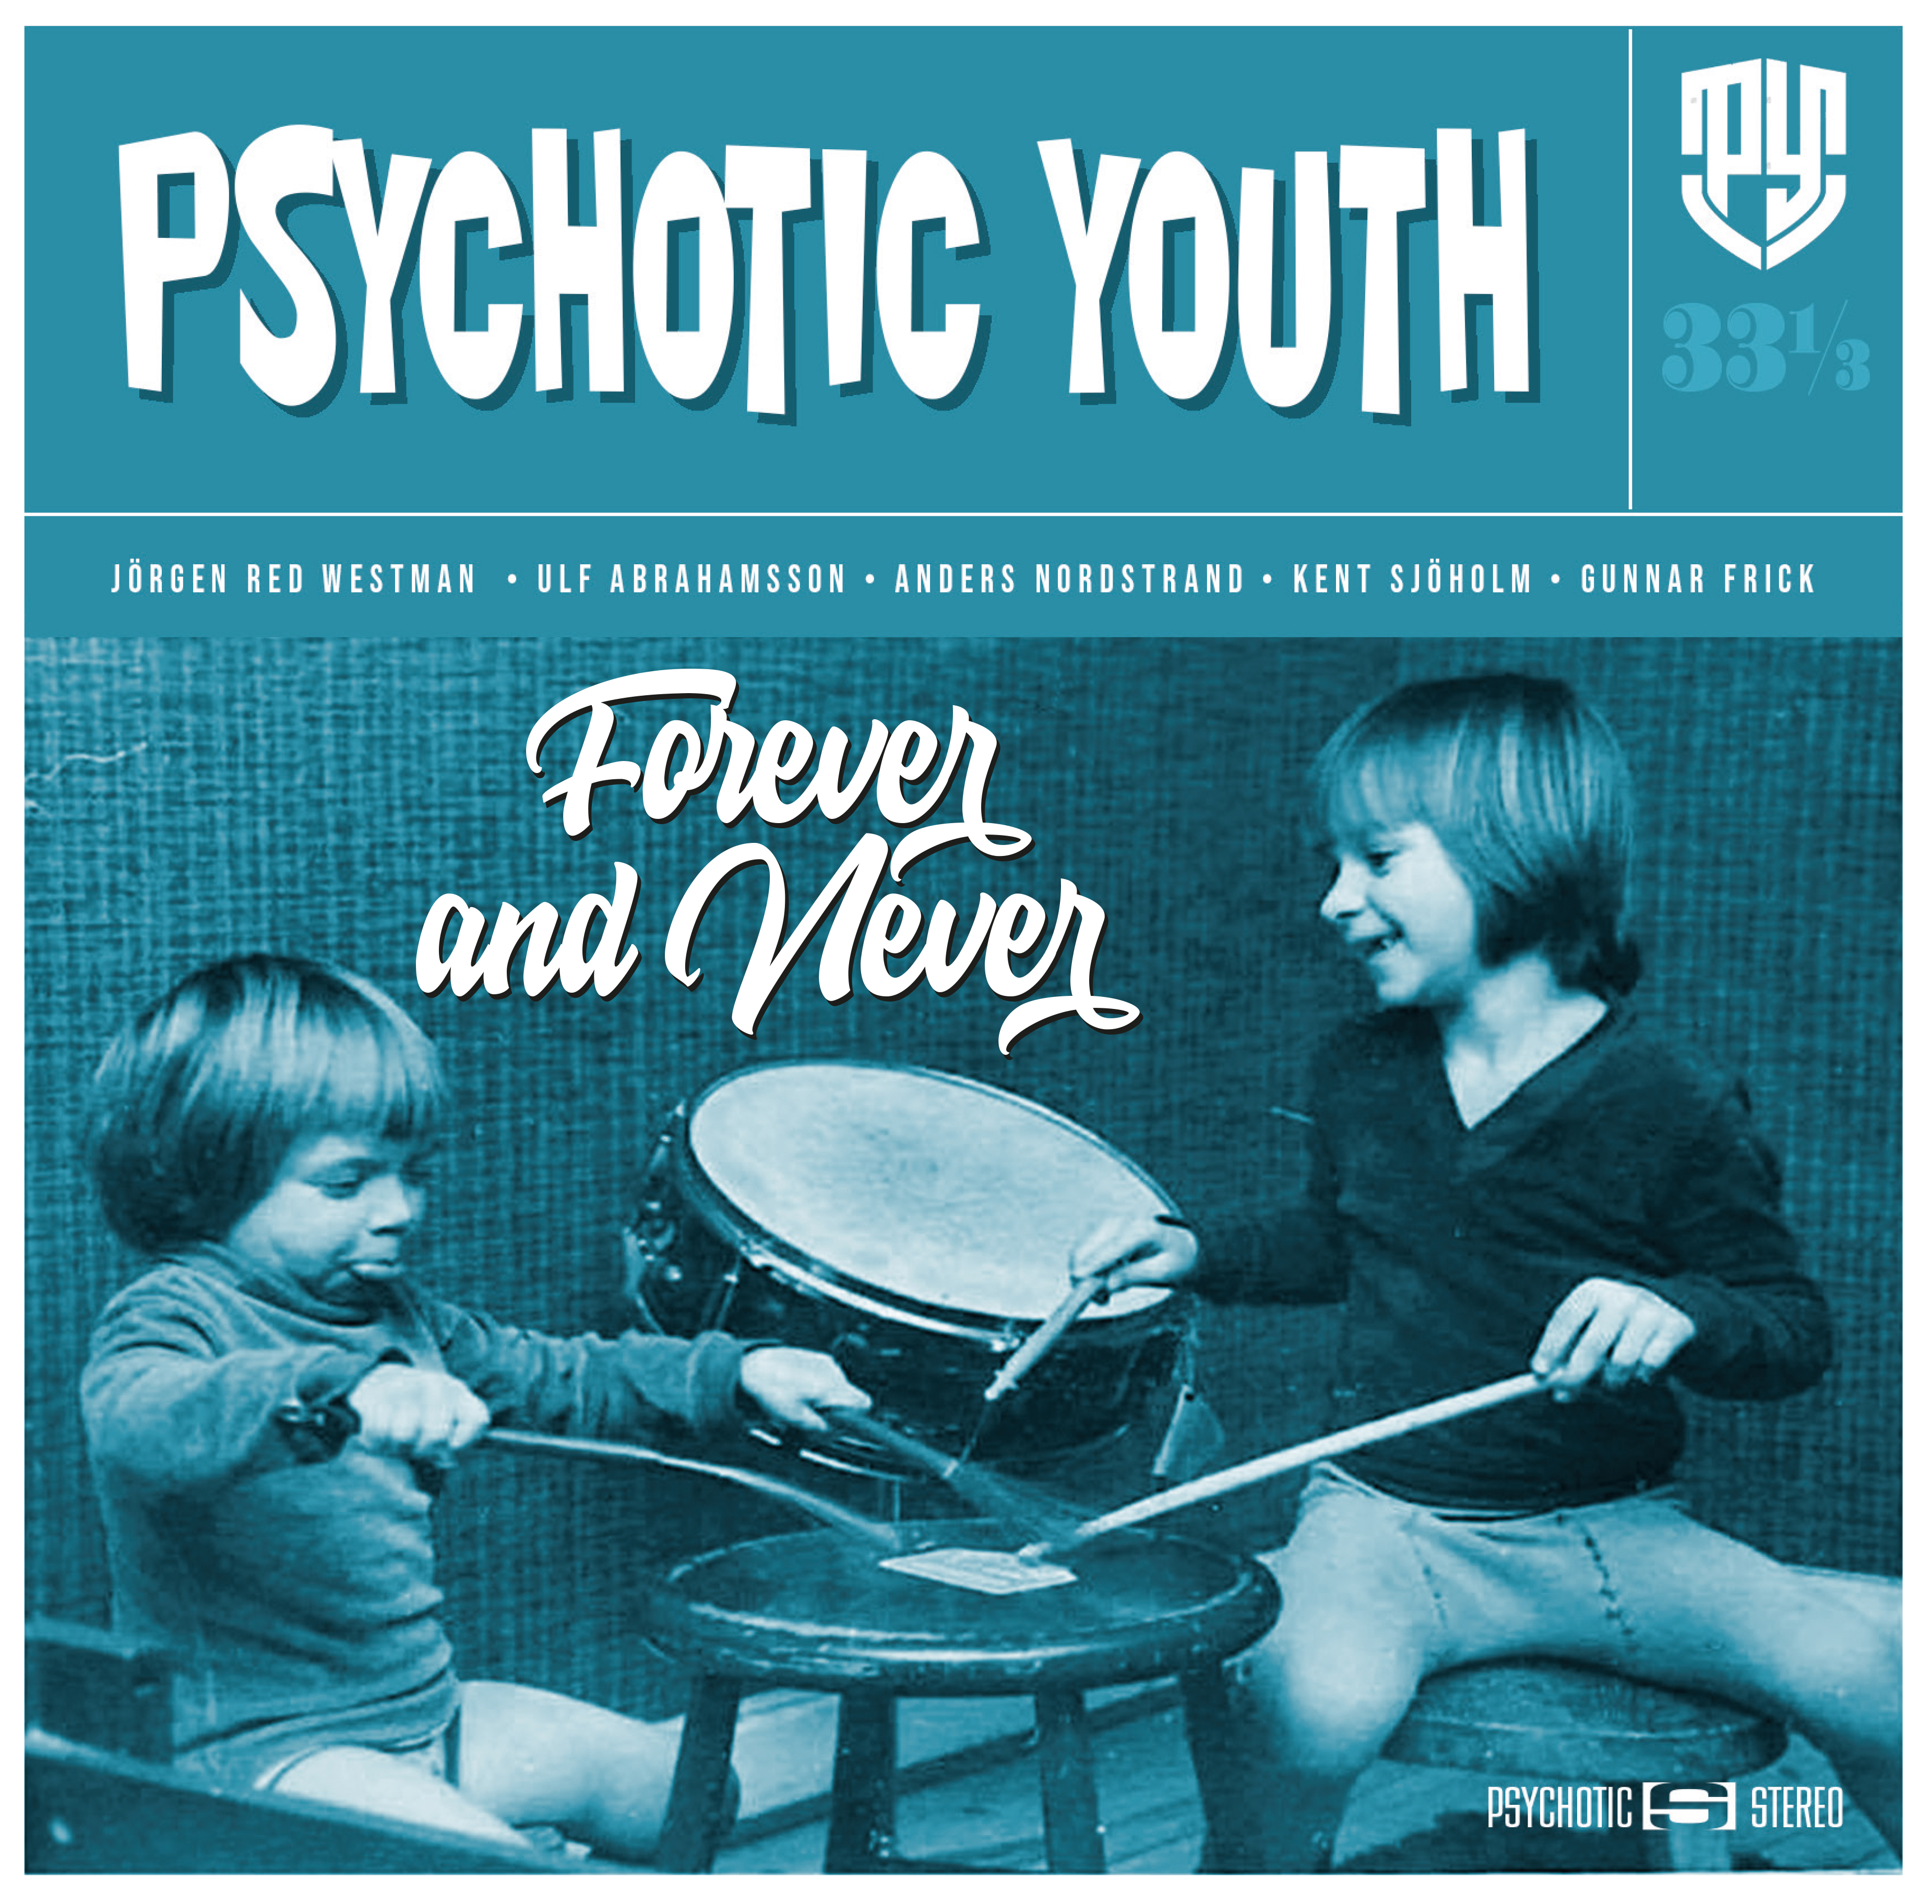 Forever And Never - Psychotic Youth